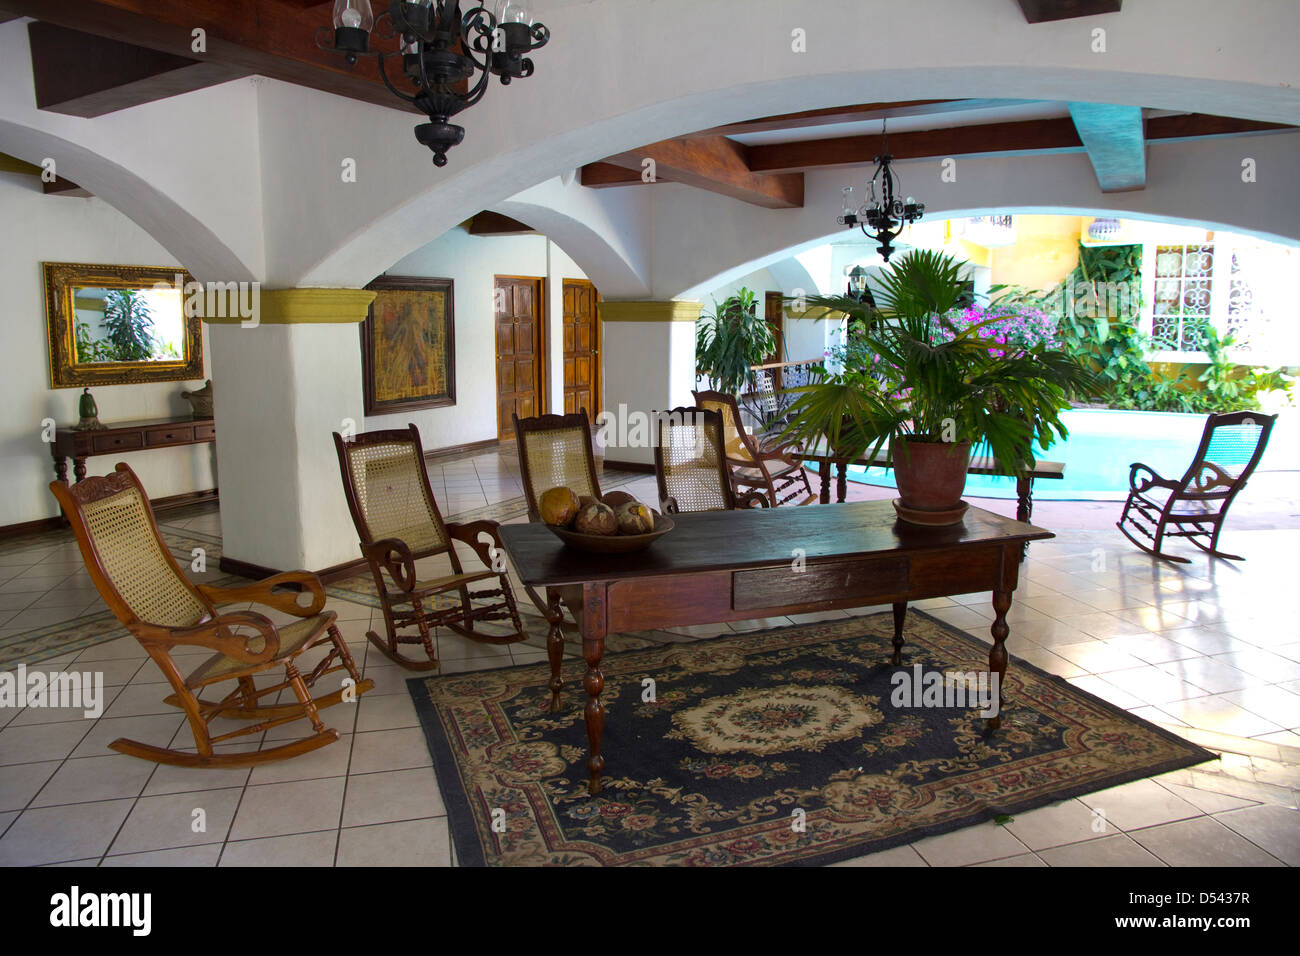 La Alhambra Hotel offers old world charm and friendly service at a moderate price in Grenada, Nicaragua Stock Photo